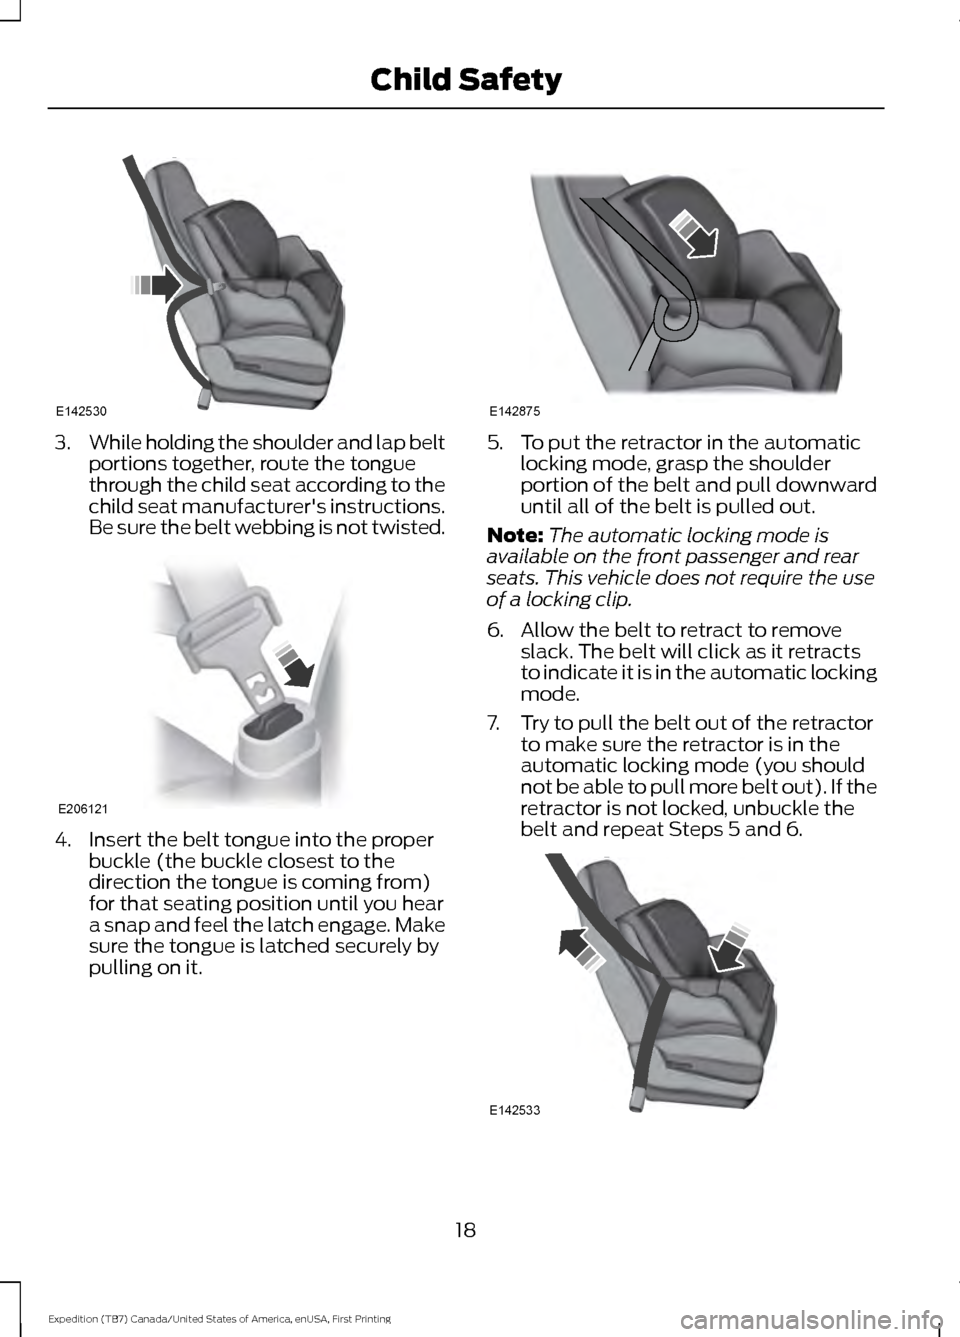 FORD EXPEDITION 2016 3.G Owners Manual 3.
While holding the shoulder and lap belt
portions together, route the tongue
through the child seat according to the
child seat manufacturers instructions.
Be sure the belt webbing is not twisted. 